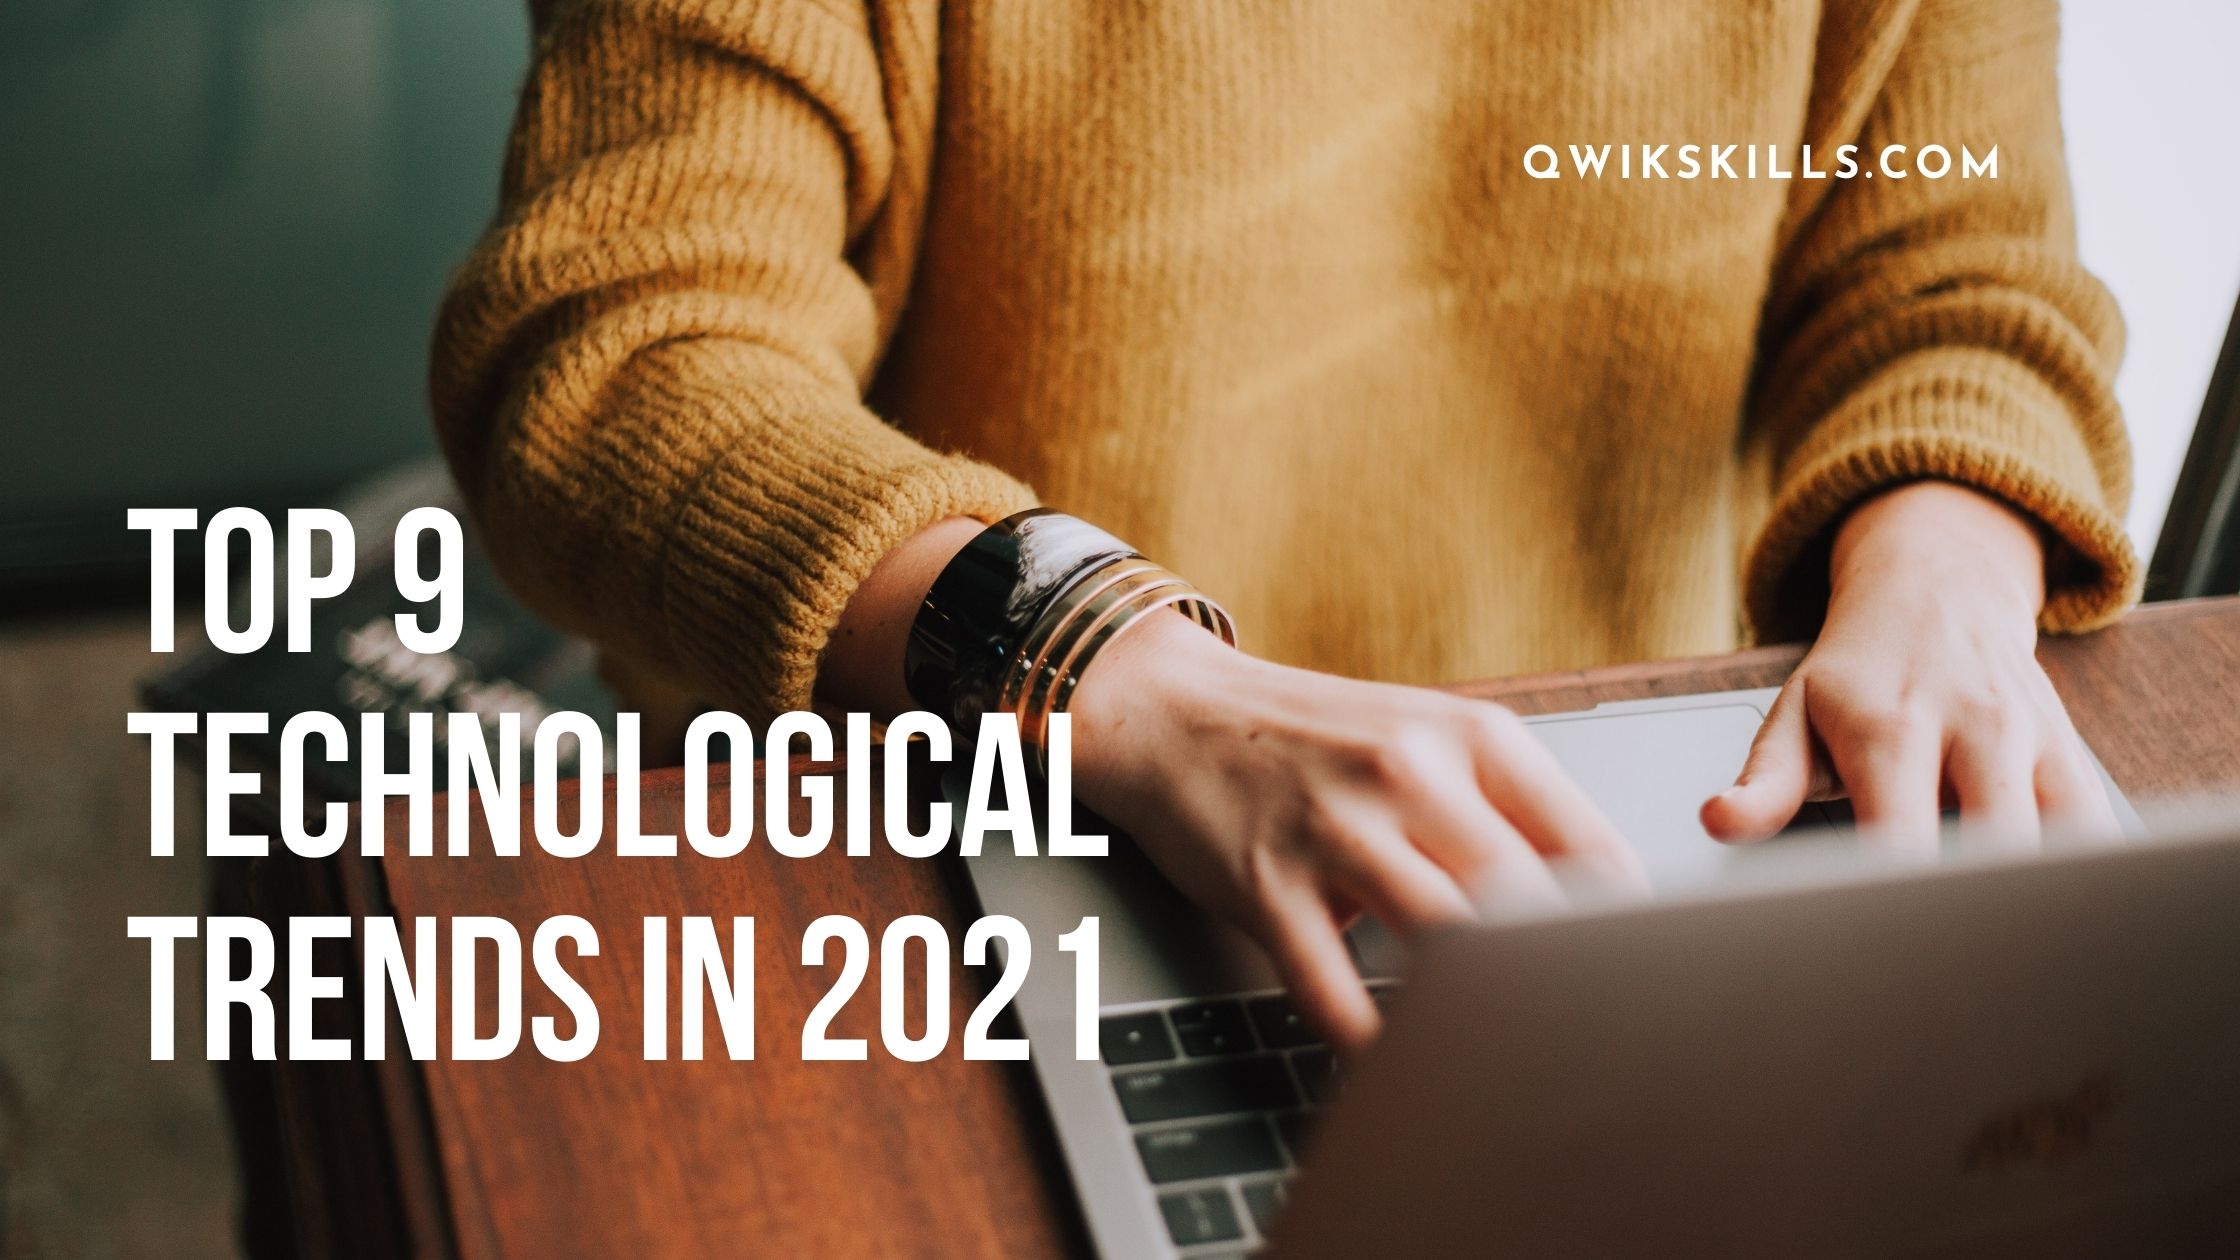 Top 9 Technological Trends in 2021